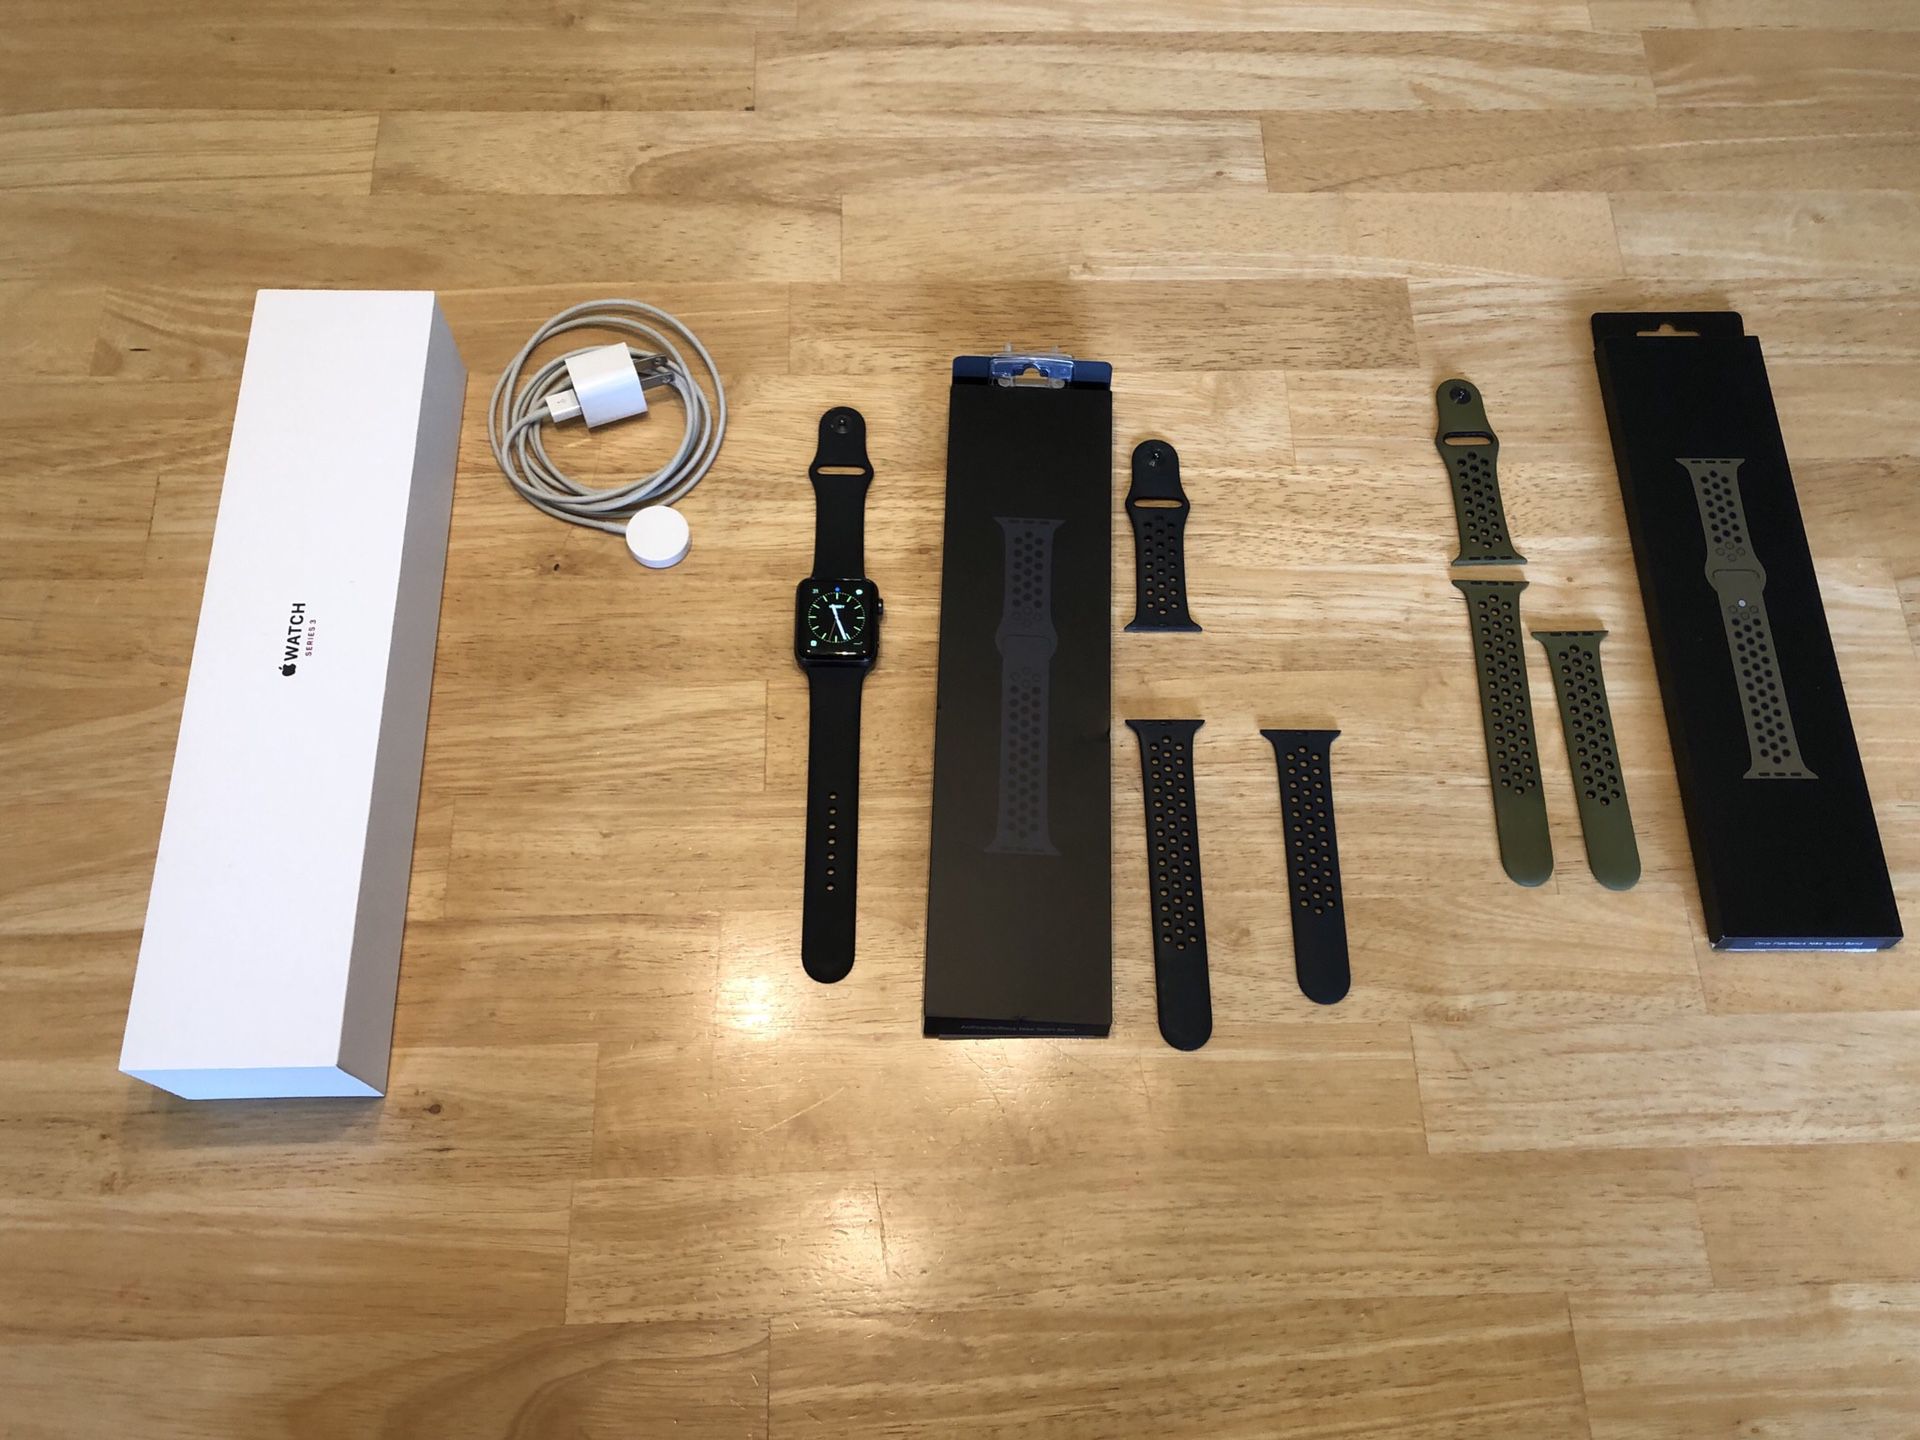 Apple Watch Series 3 Space Gray GPS & Cellular + 2 Nike Bands $250 OBO